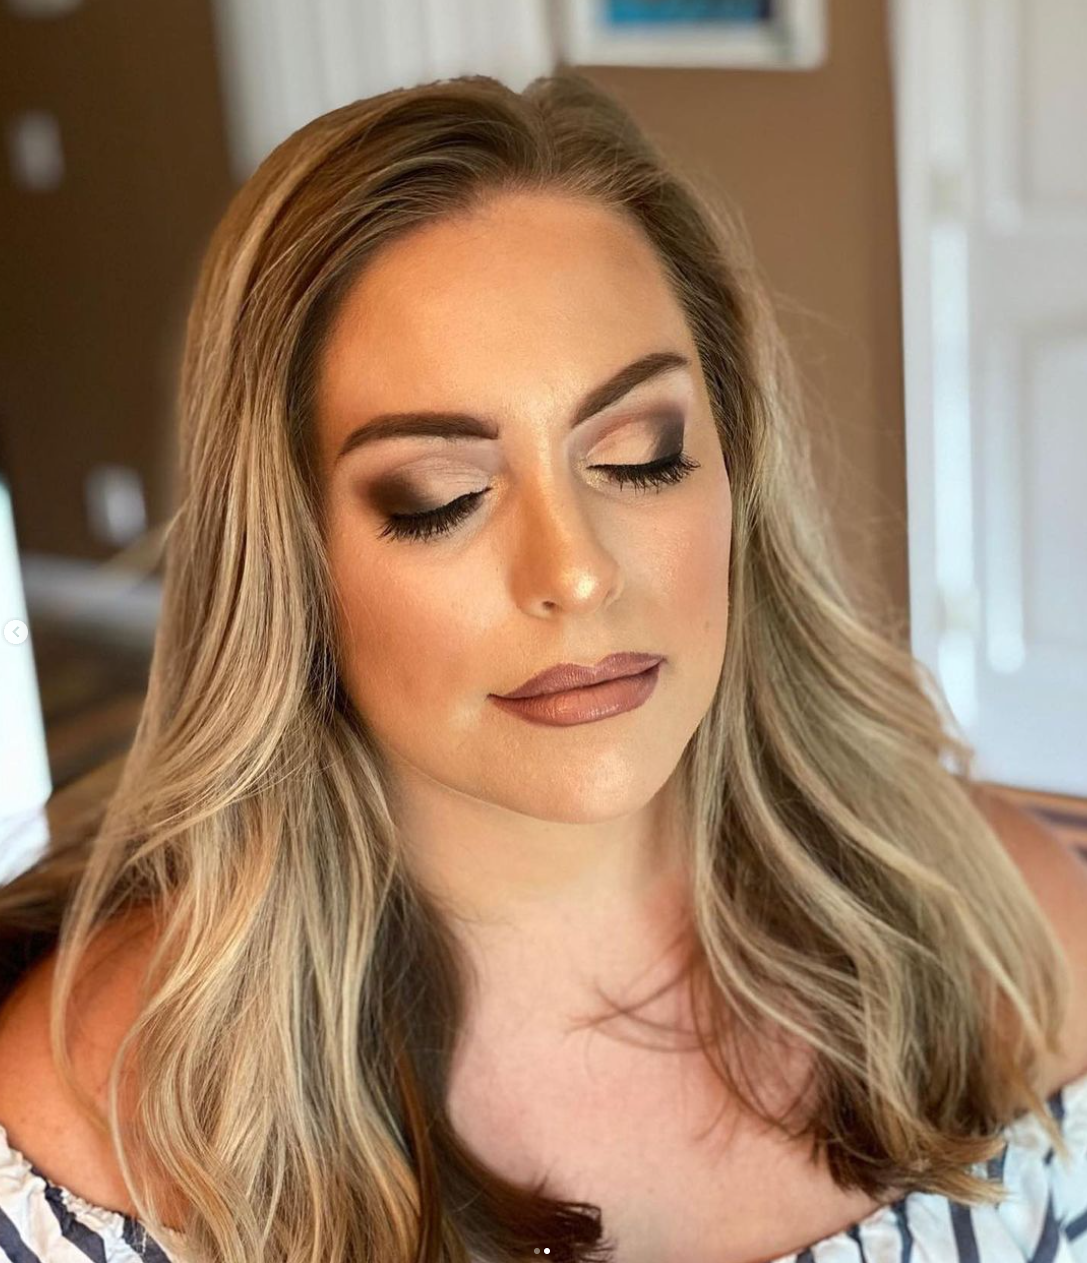 A blonde woman with formal makeup